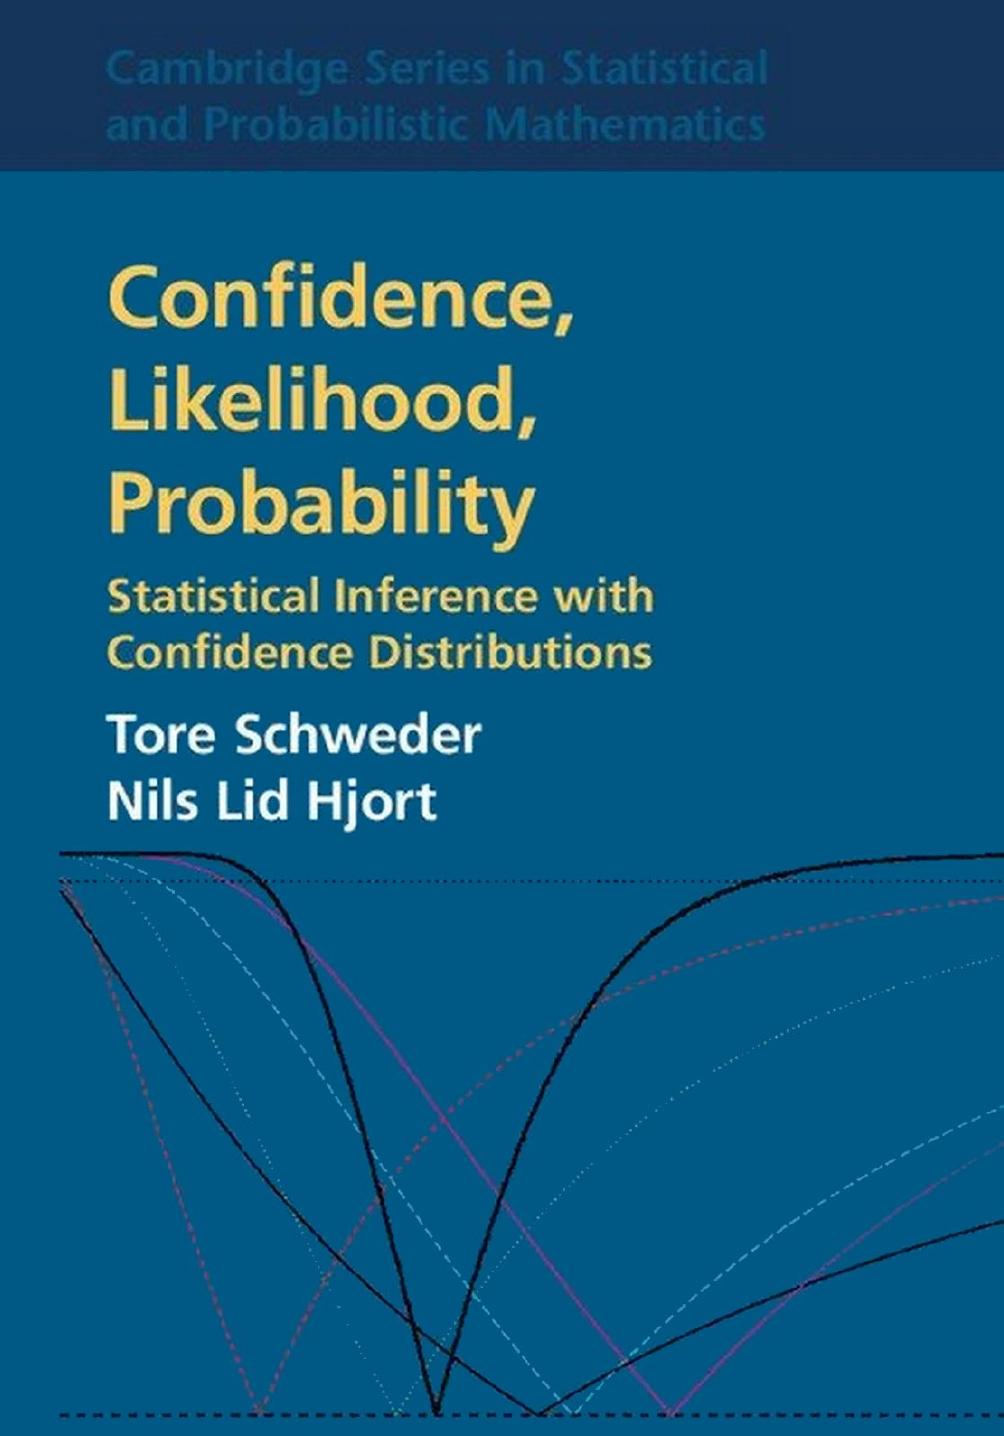 Confidence, Likelihood, Probability  Statistical Inference with Confidence Distributions 2016.pdf